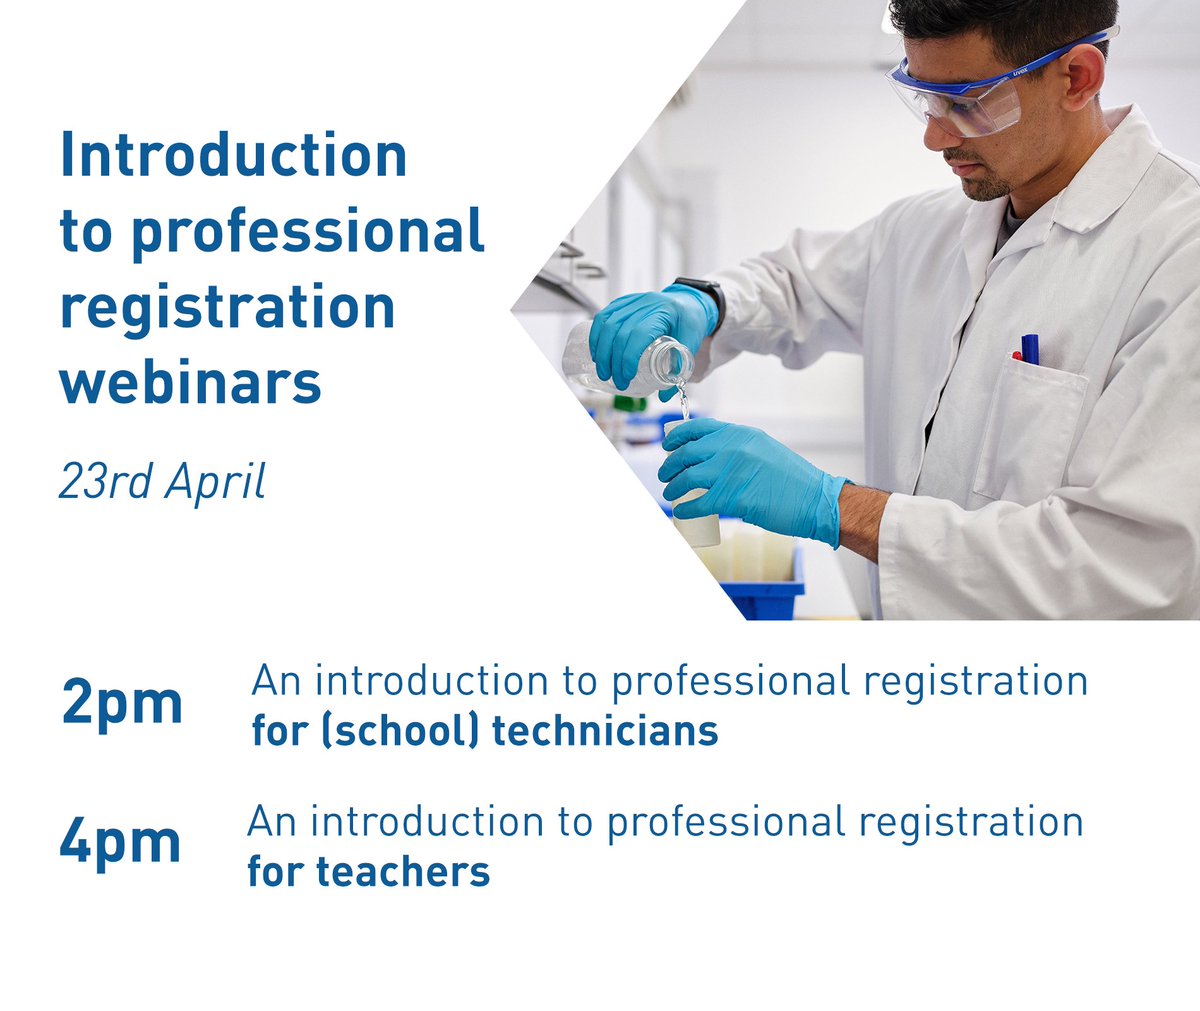 Don't miss out on these webinars about professional registration for technicians and teachers! 📅23rd April 2pm - Professional registration for technicians eventbrite.co.uk/e/an-introduct… 📅23rd April 4pm - Professional registration for teachers eventbrite.co.uk/e/an-introduct… @theASE